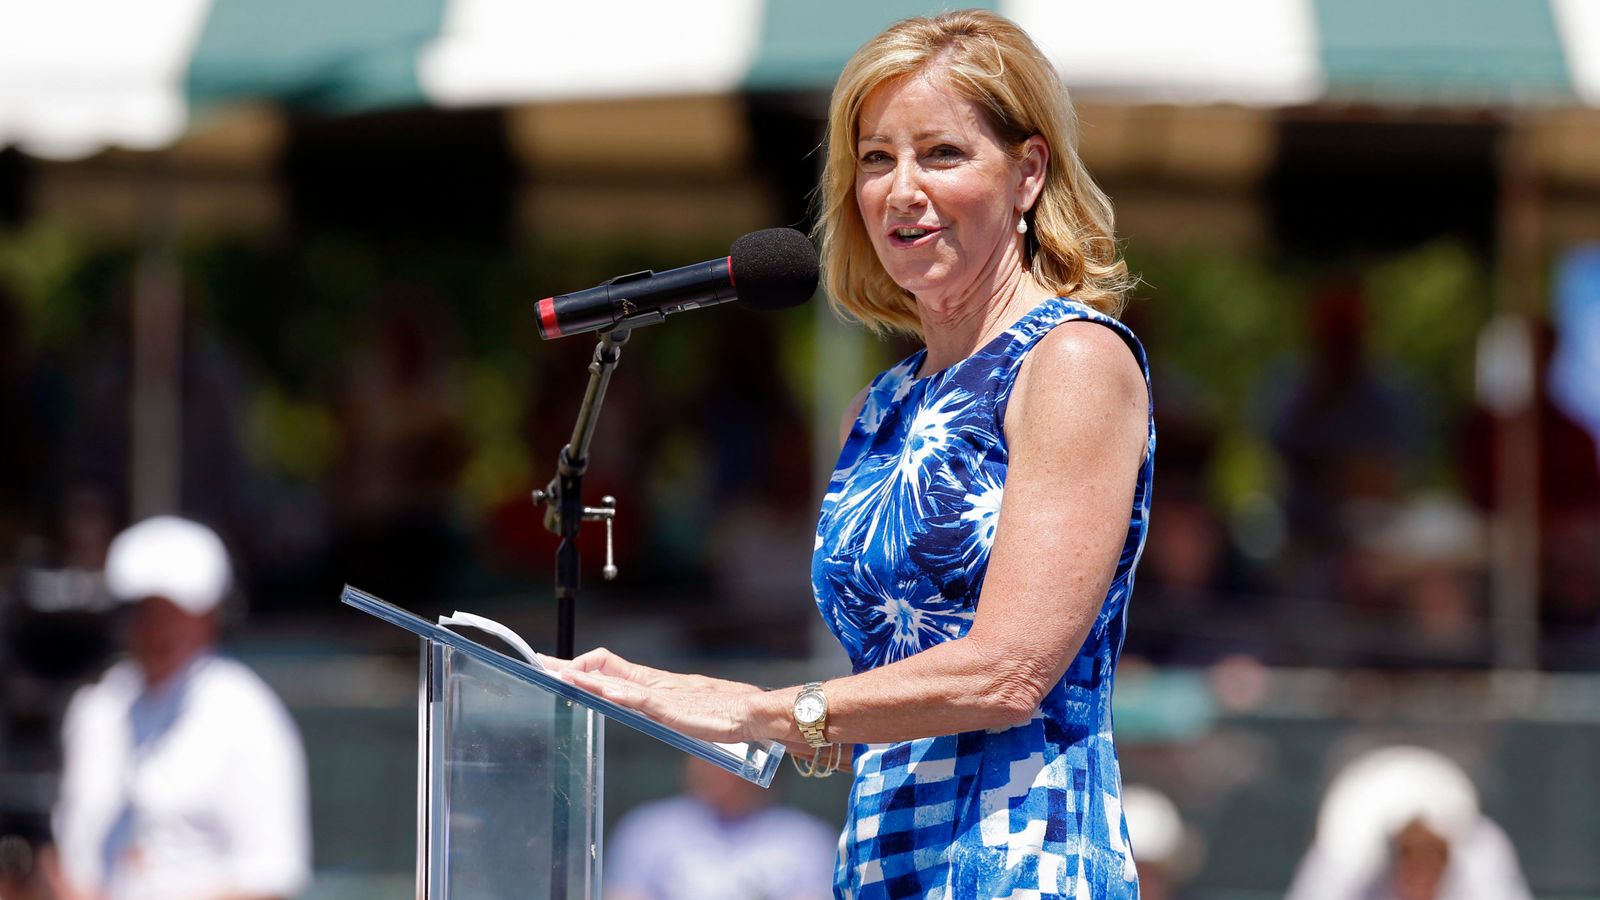 ‘I feel very lucky’: Tennis star Chris Evert opens up about early ovarian cancer diagnosis